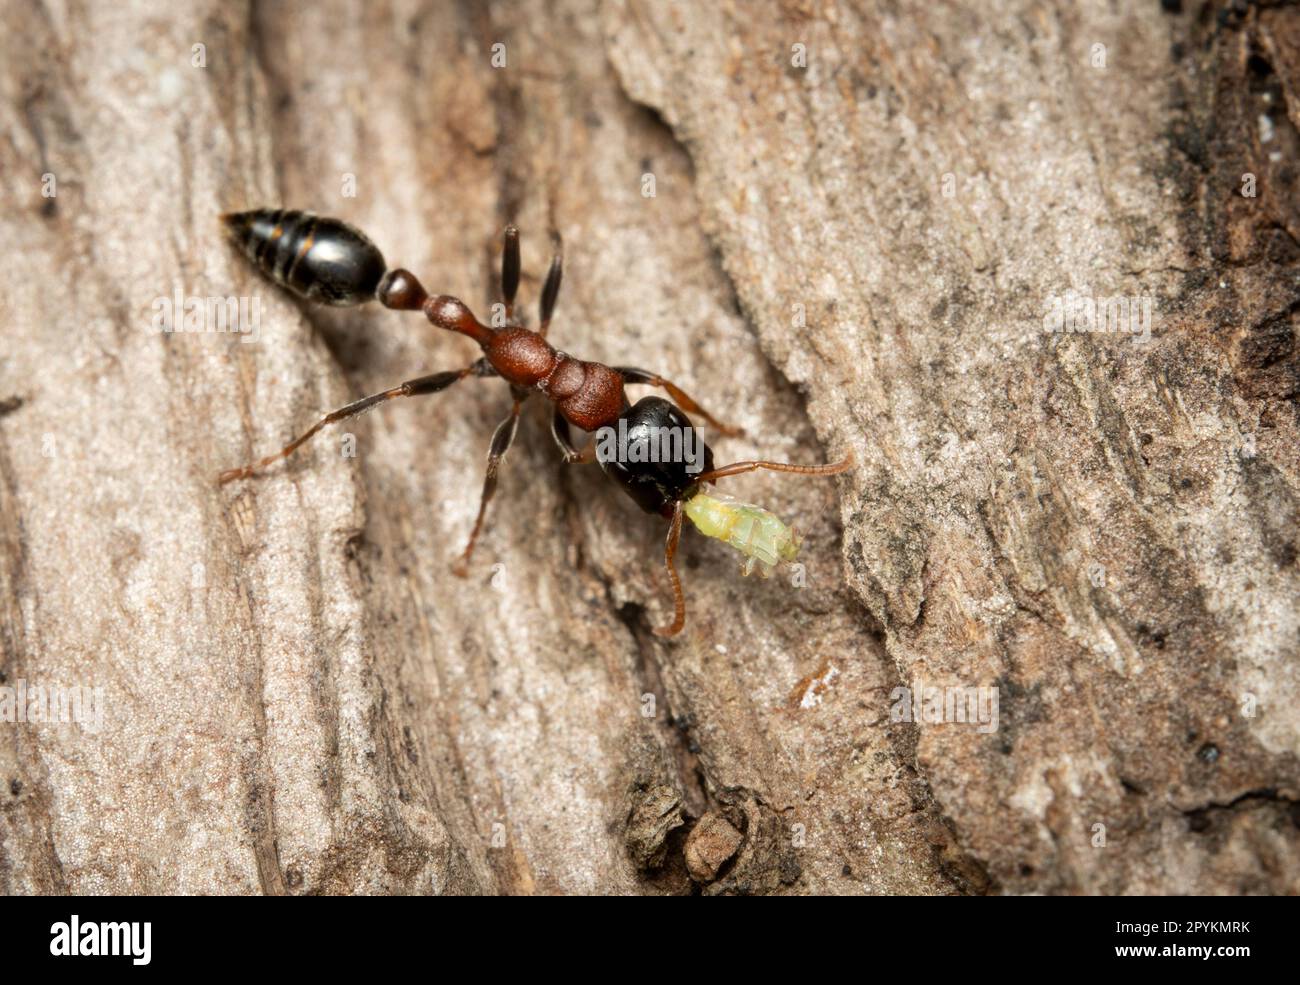 An Arboreal Bicolored Slender Ant carring an aphid on the bark of a tree. Stock Photo